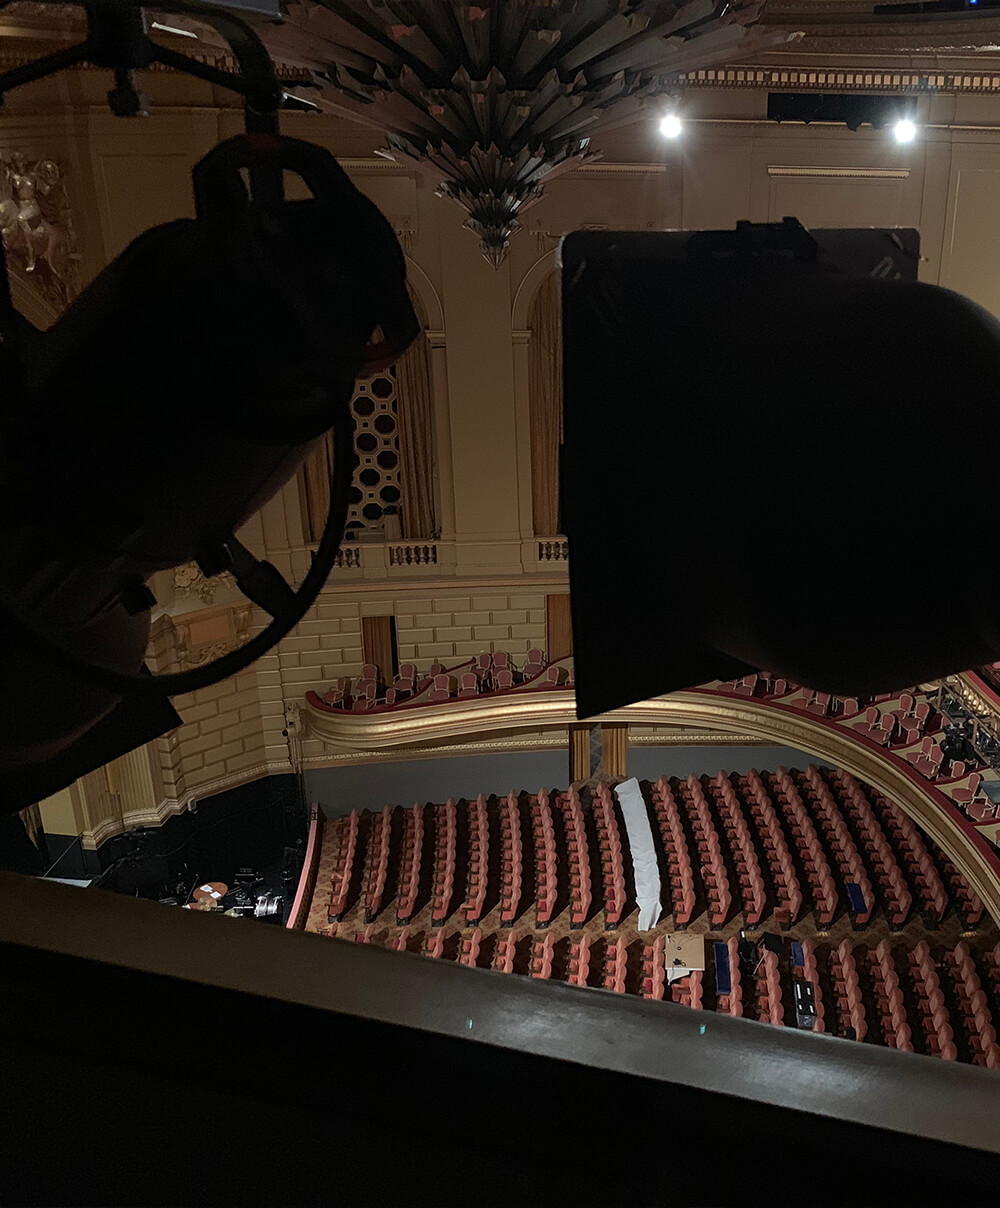 Two images of speaker locations, one in the organ bays and one in the lighting position at the top of the auditorium.